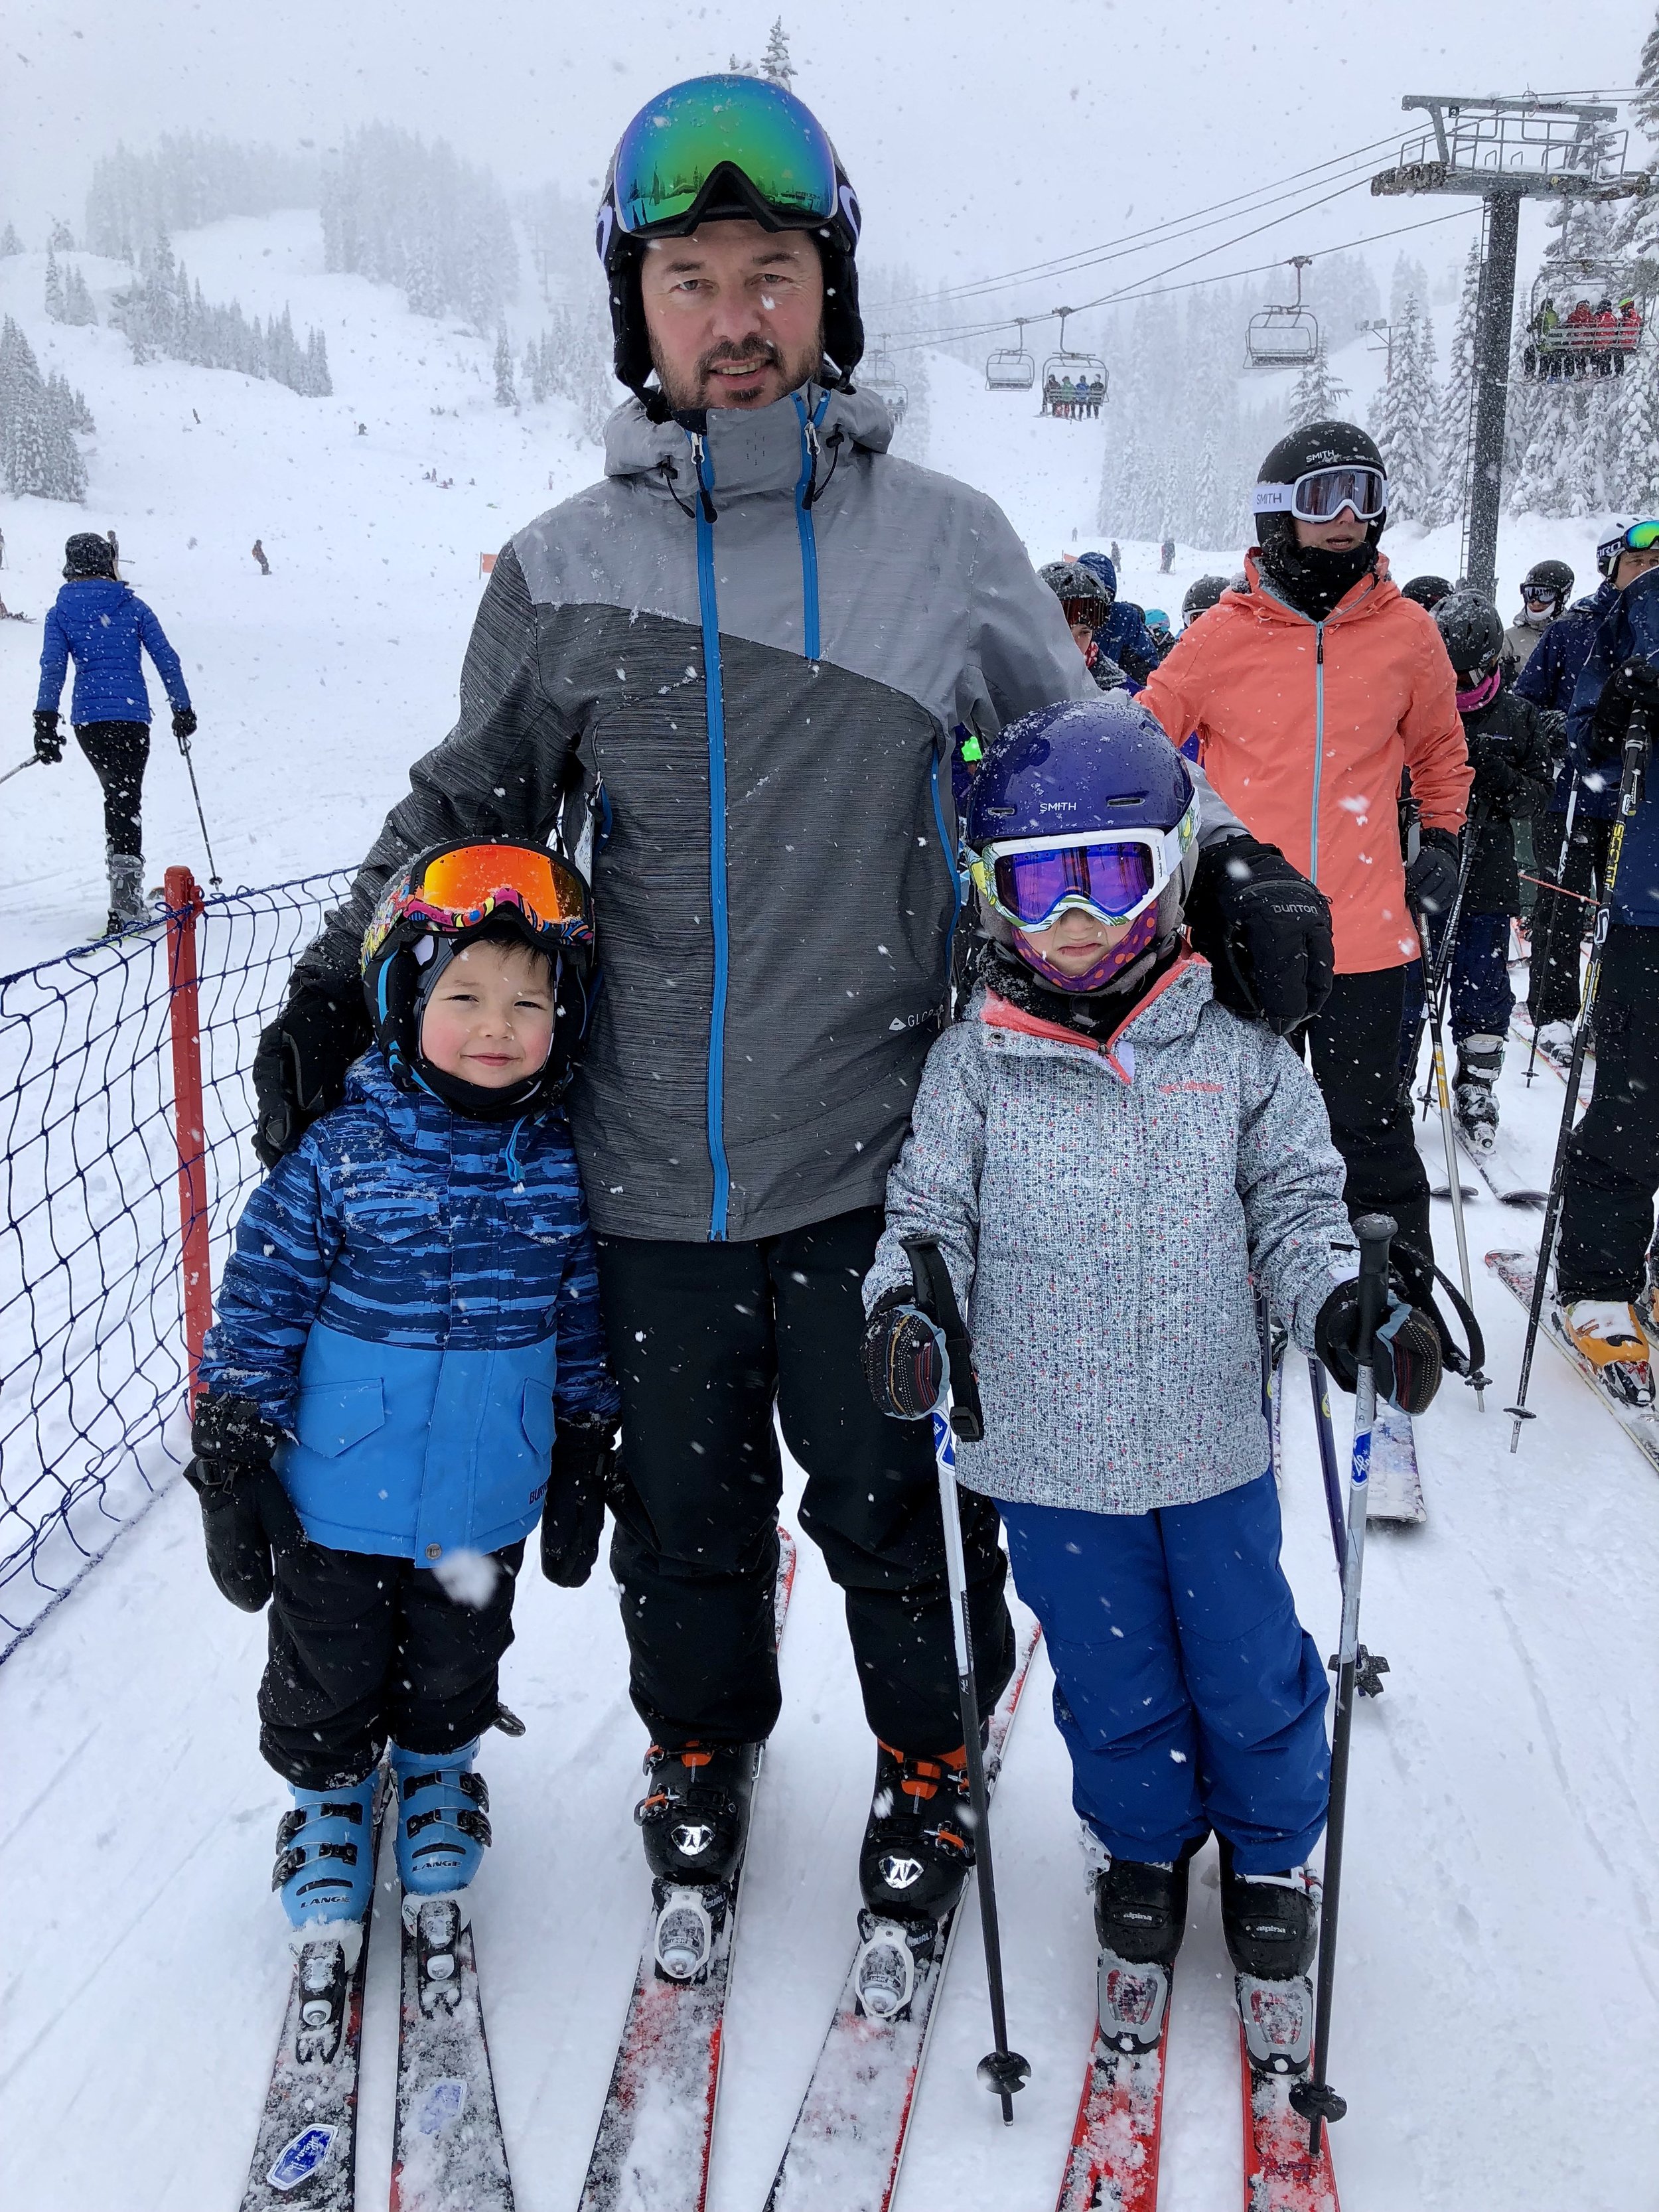 Snowy day on the slopes